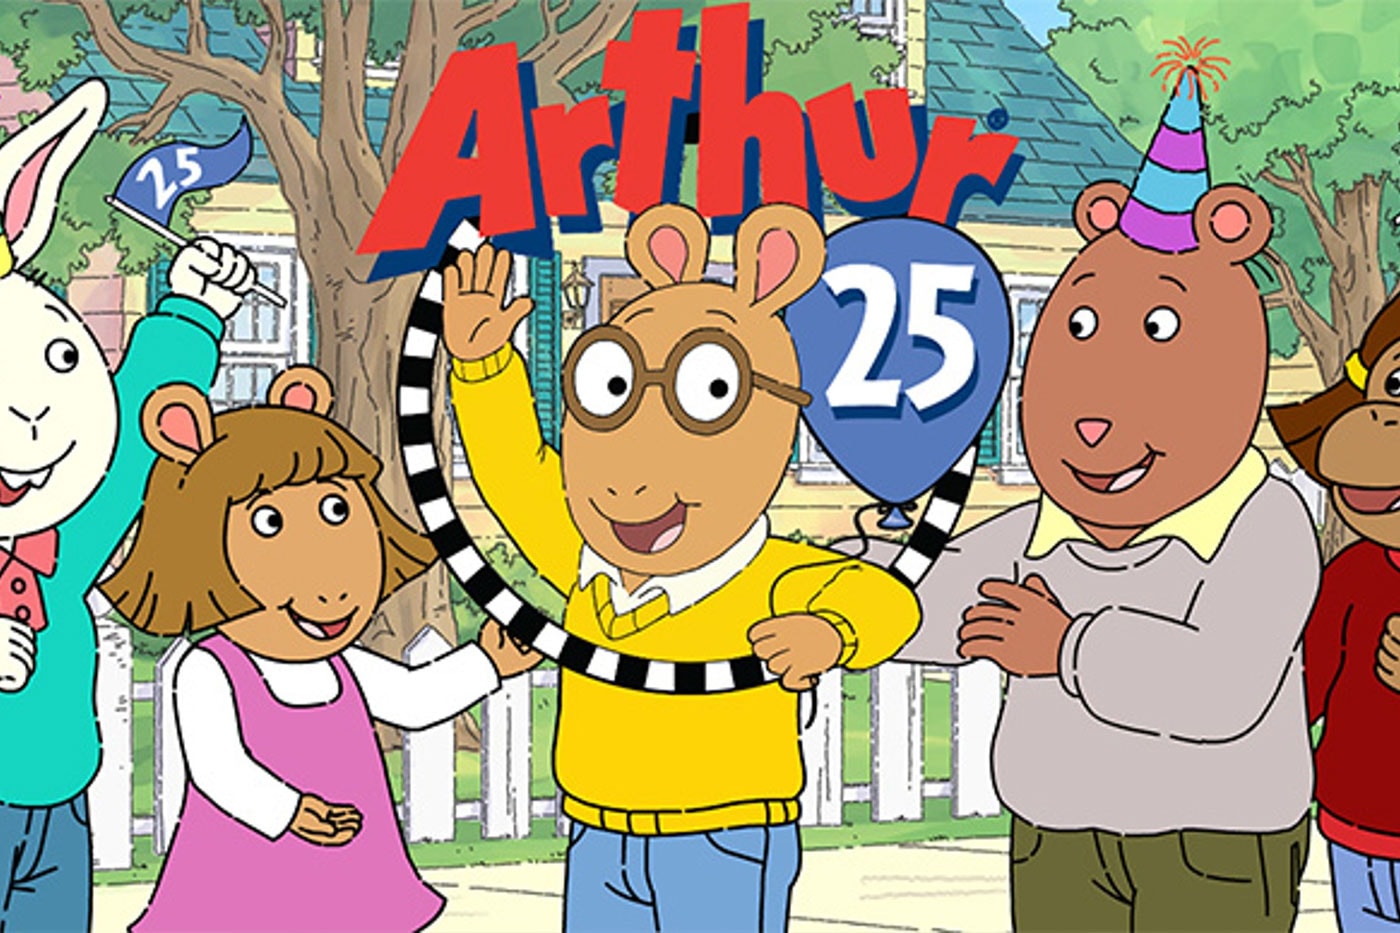 'Arthur' Finale To Conclude With Grown-Up Versions of the Show's Beloved Characters pbs cartoon animated show binky barnes muffy crosswire buster baxter